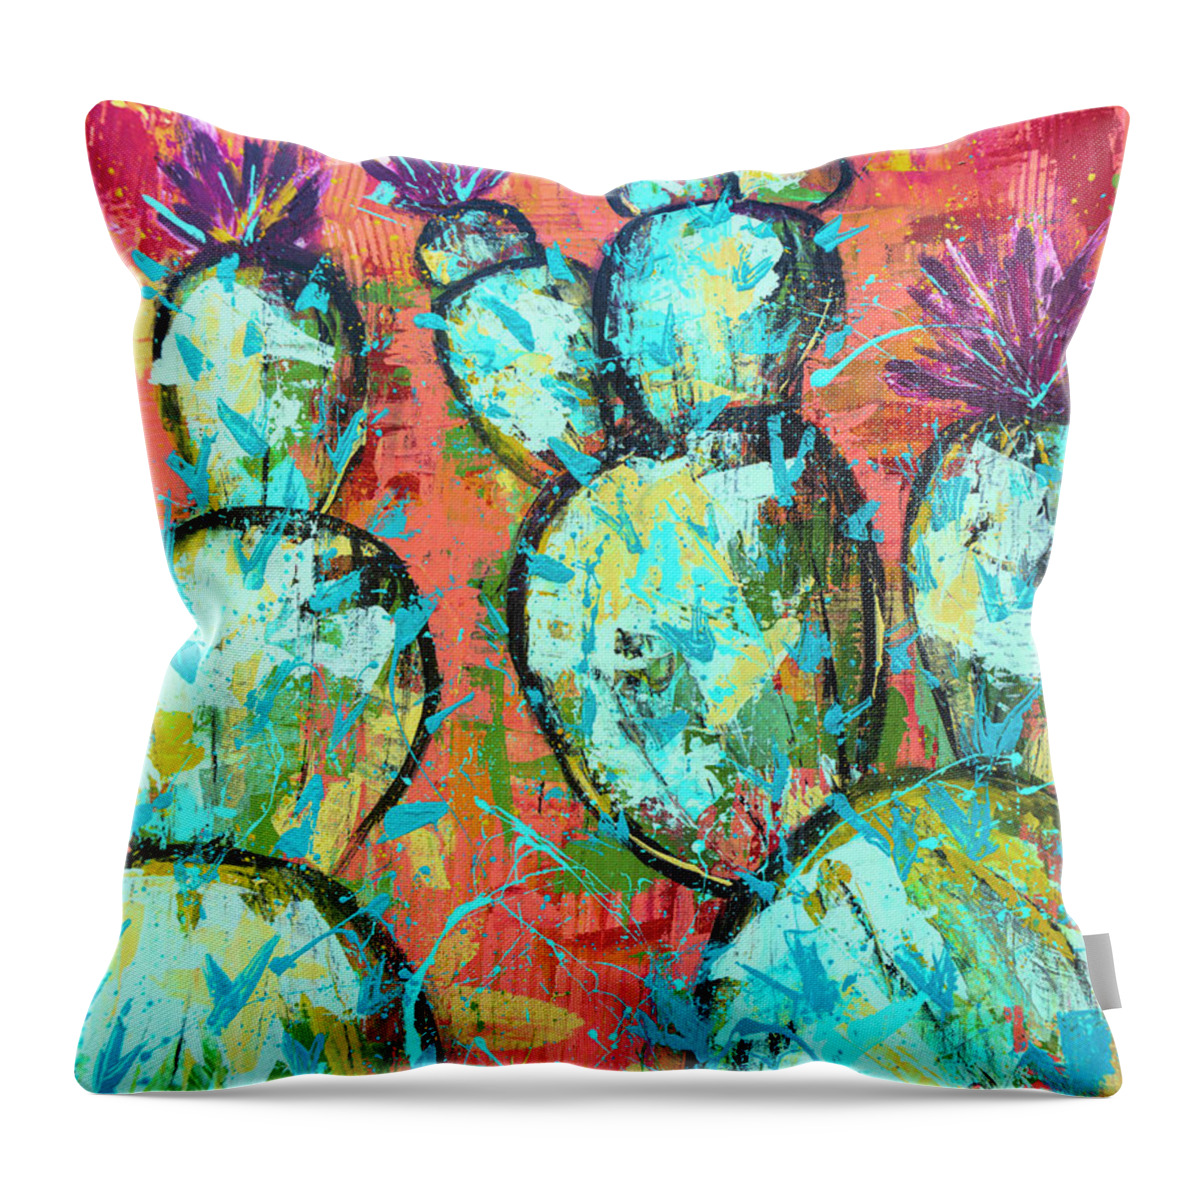 Southwestern Throw Pillow featuring the painting Southwestern Coral Cactus Abstract Vivid by Joanne Herrmann